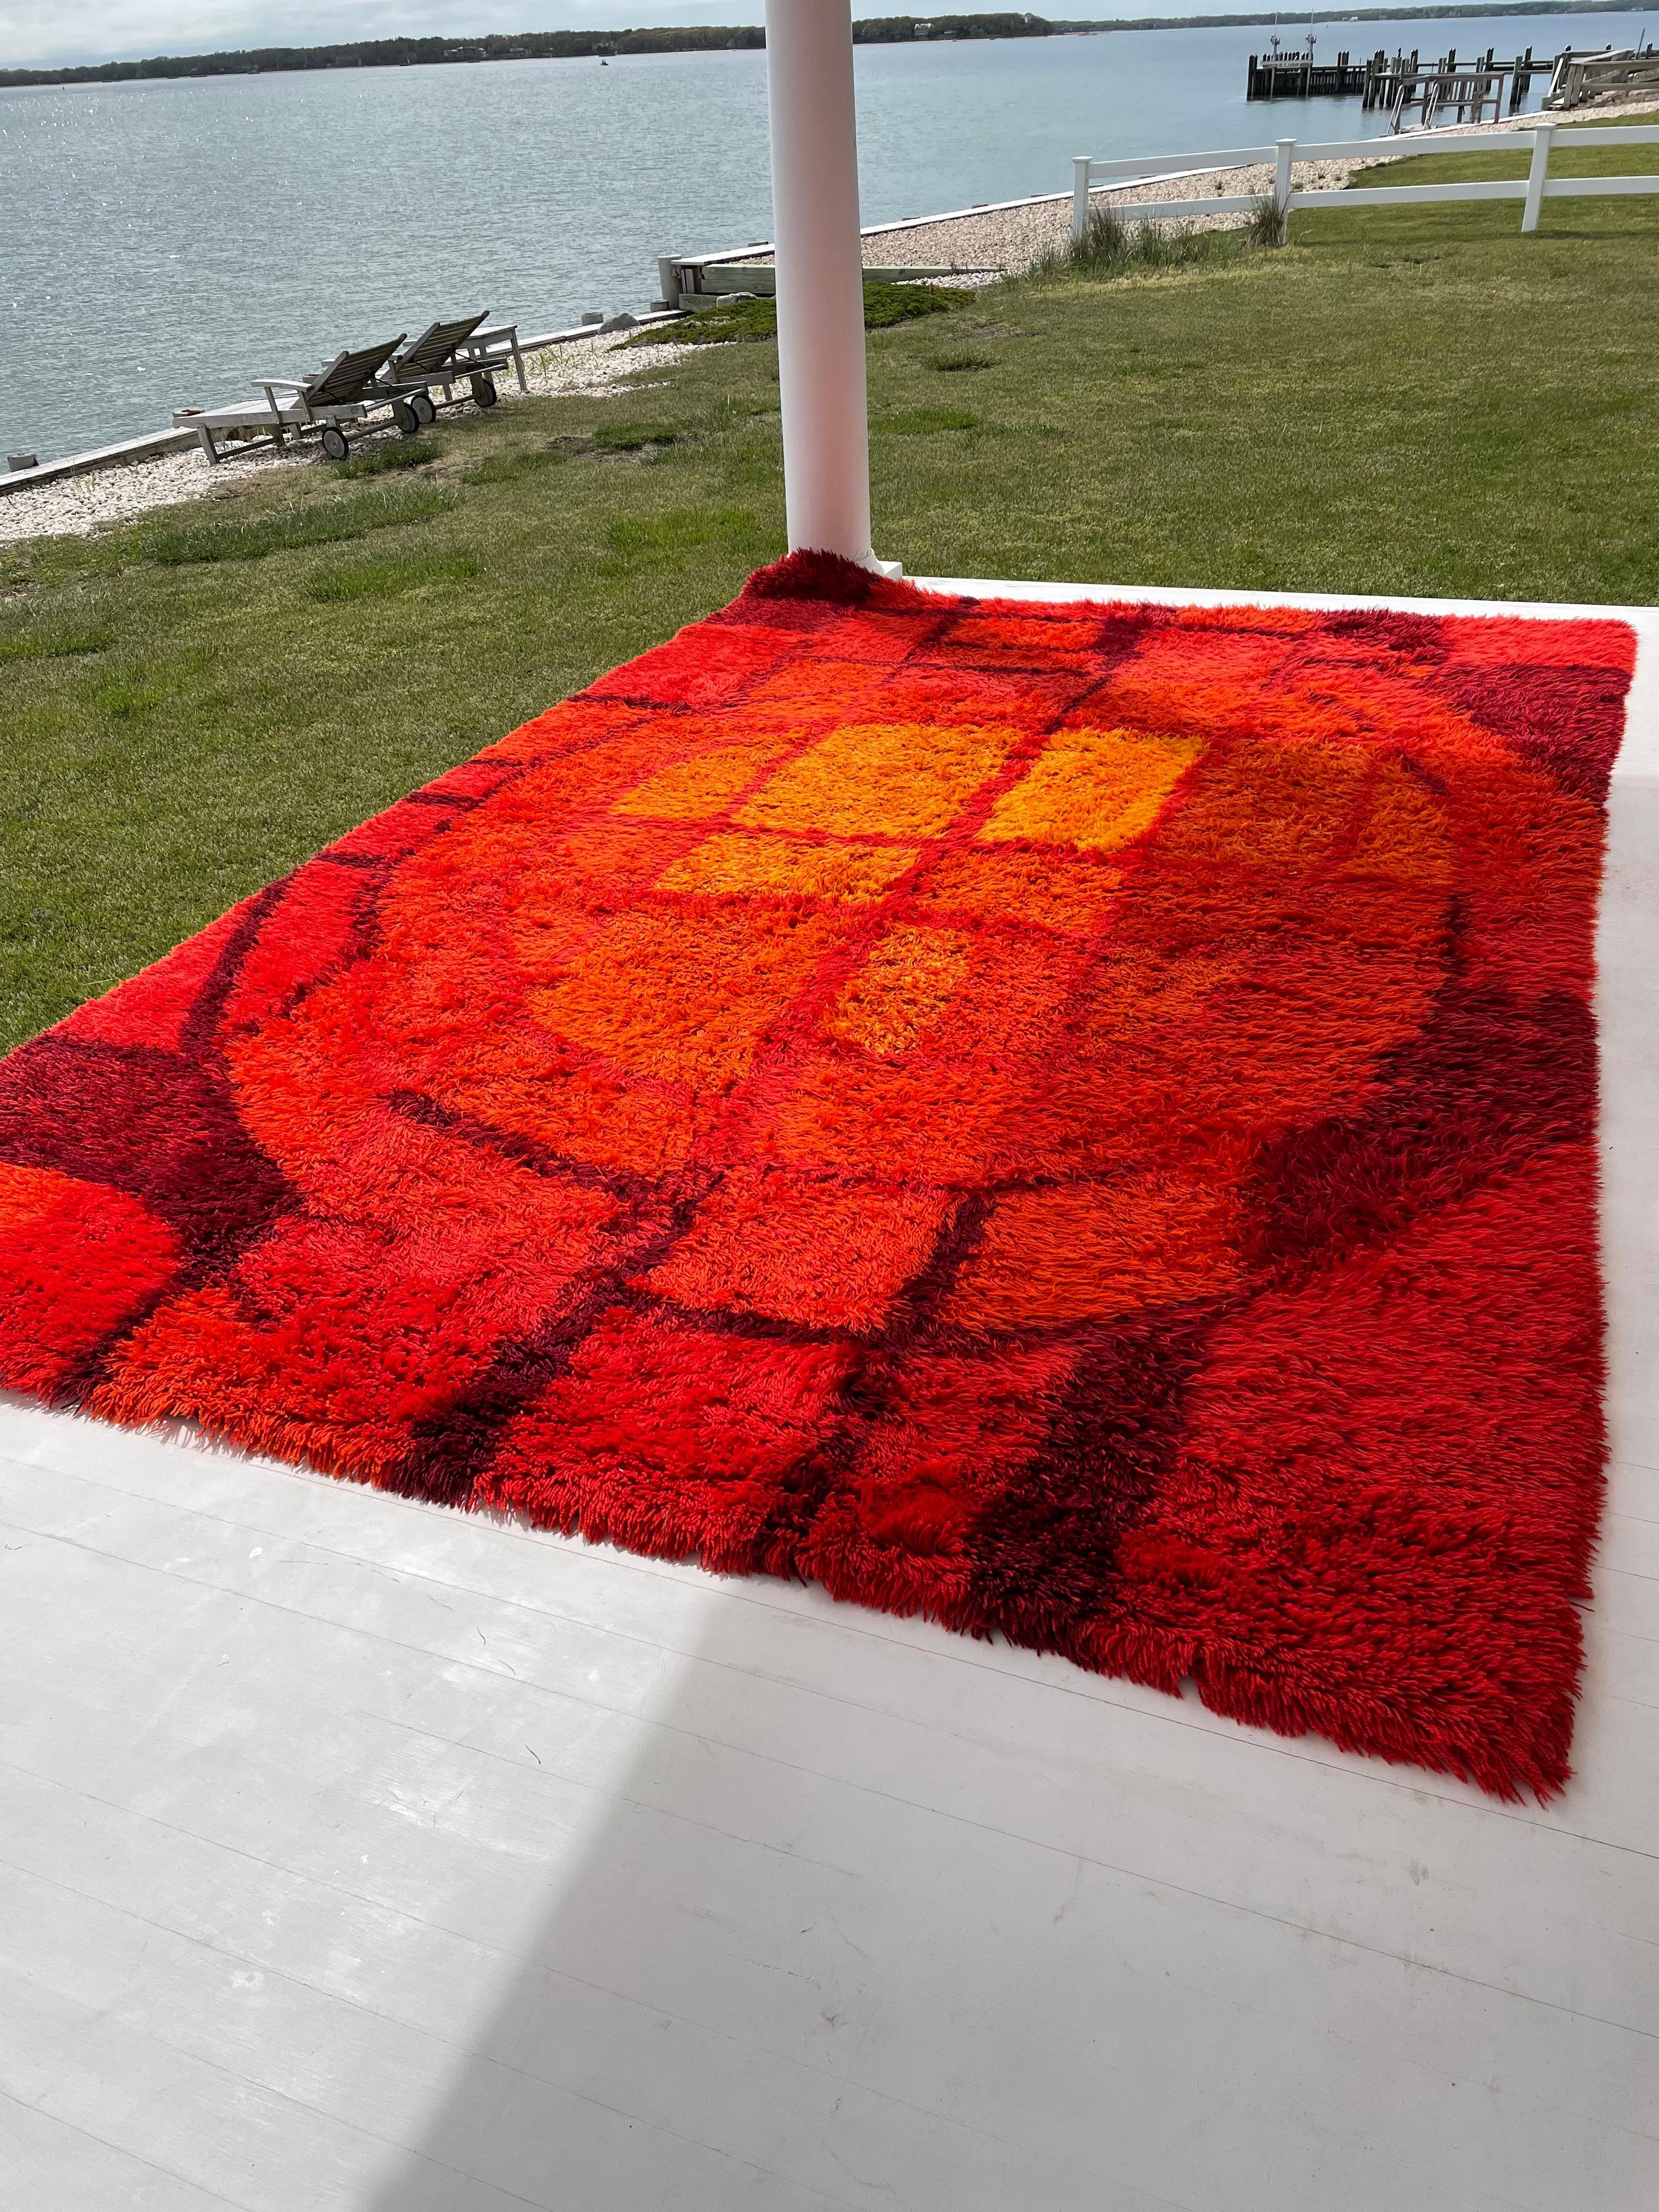 Stunning and rare. Hard to find these Scandinavian Rya vintage rugs in this large size in such good condition . This plush vibrant Rya Rug has oranges, reds and yellows in an abstract geometric design .Expertly woven and amazingly clean and ready to